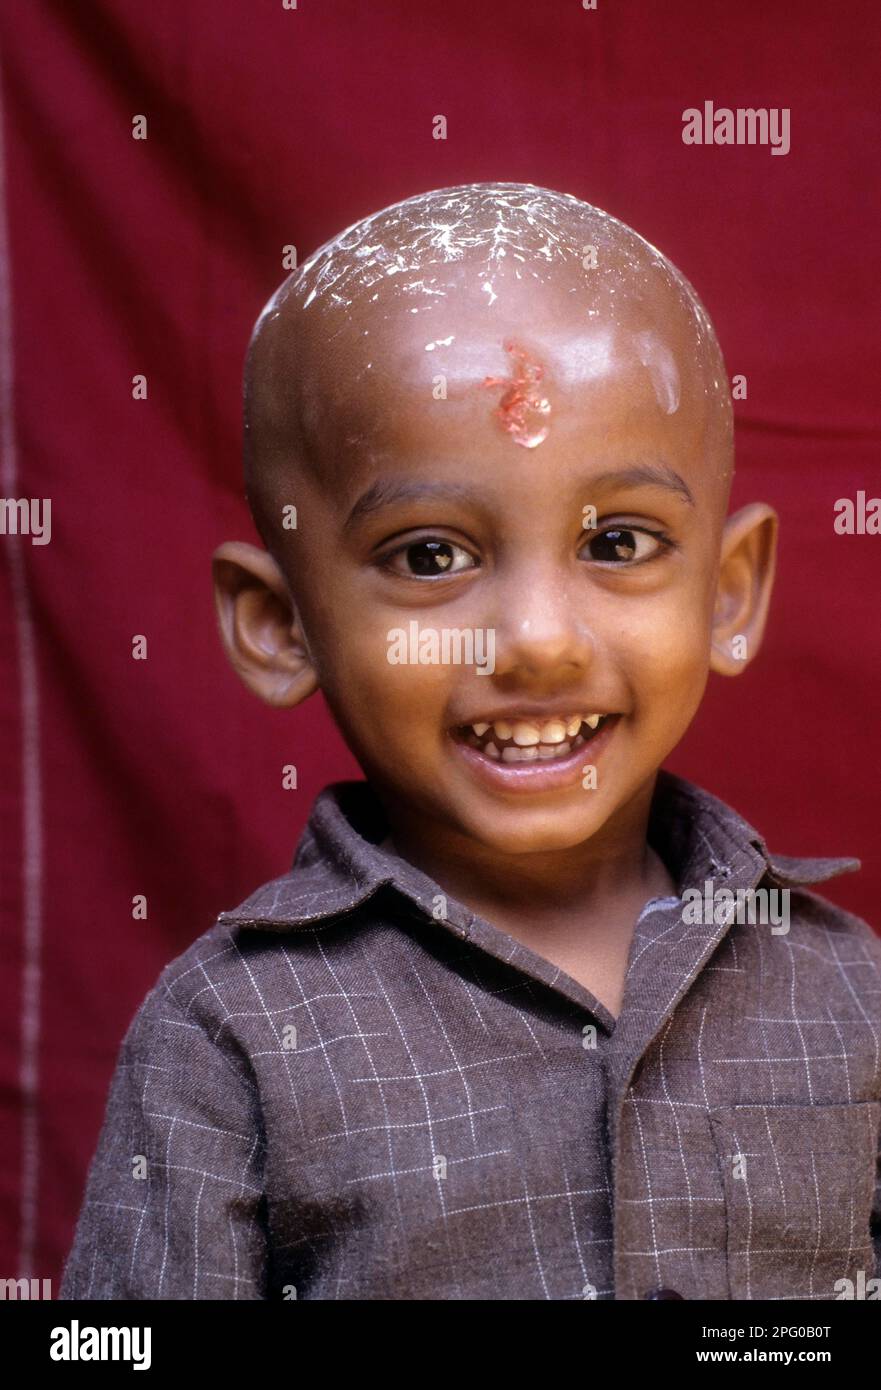 South Asia Indian boy smiling after his tonsure ceremony, Tamil Nadu, India, Asia Stock Photo